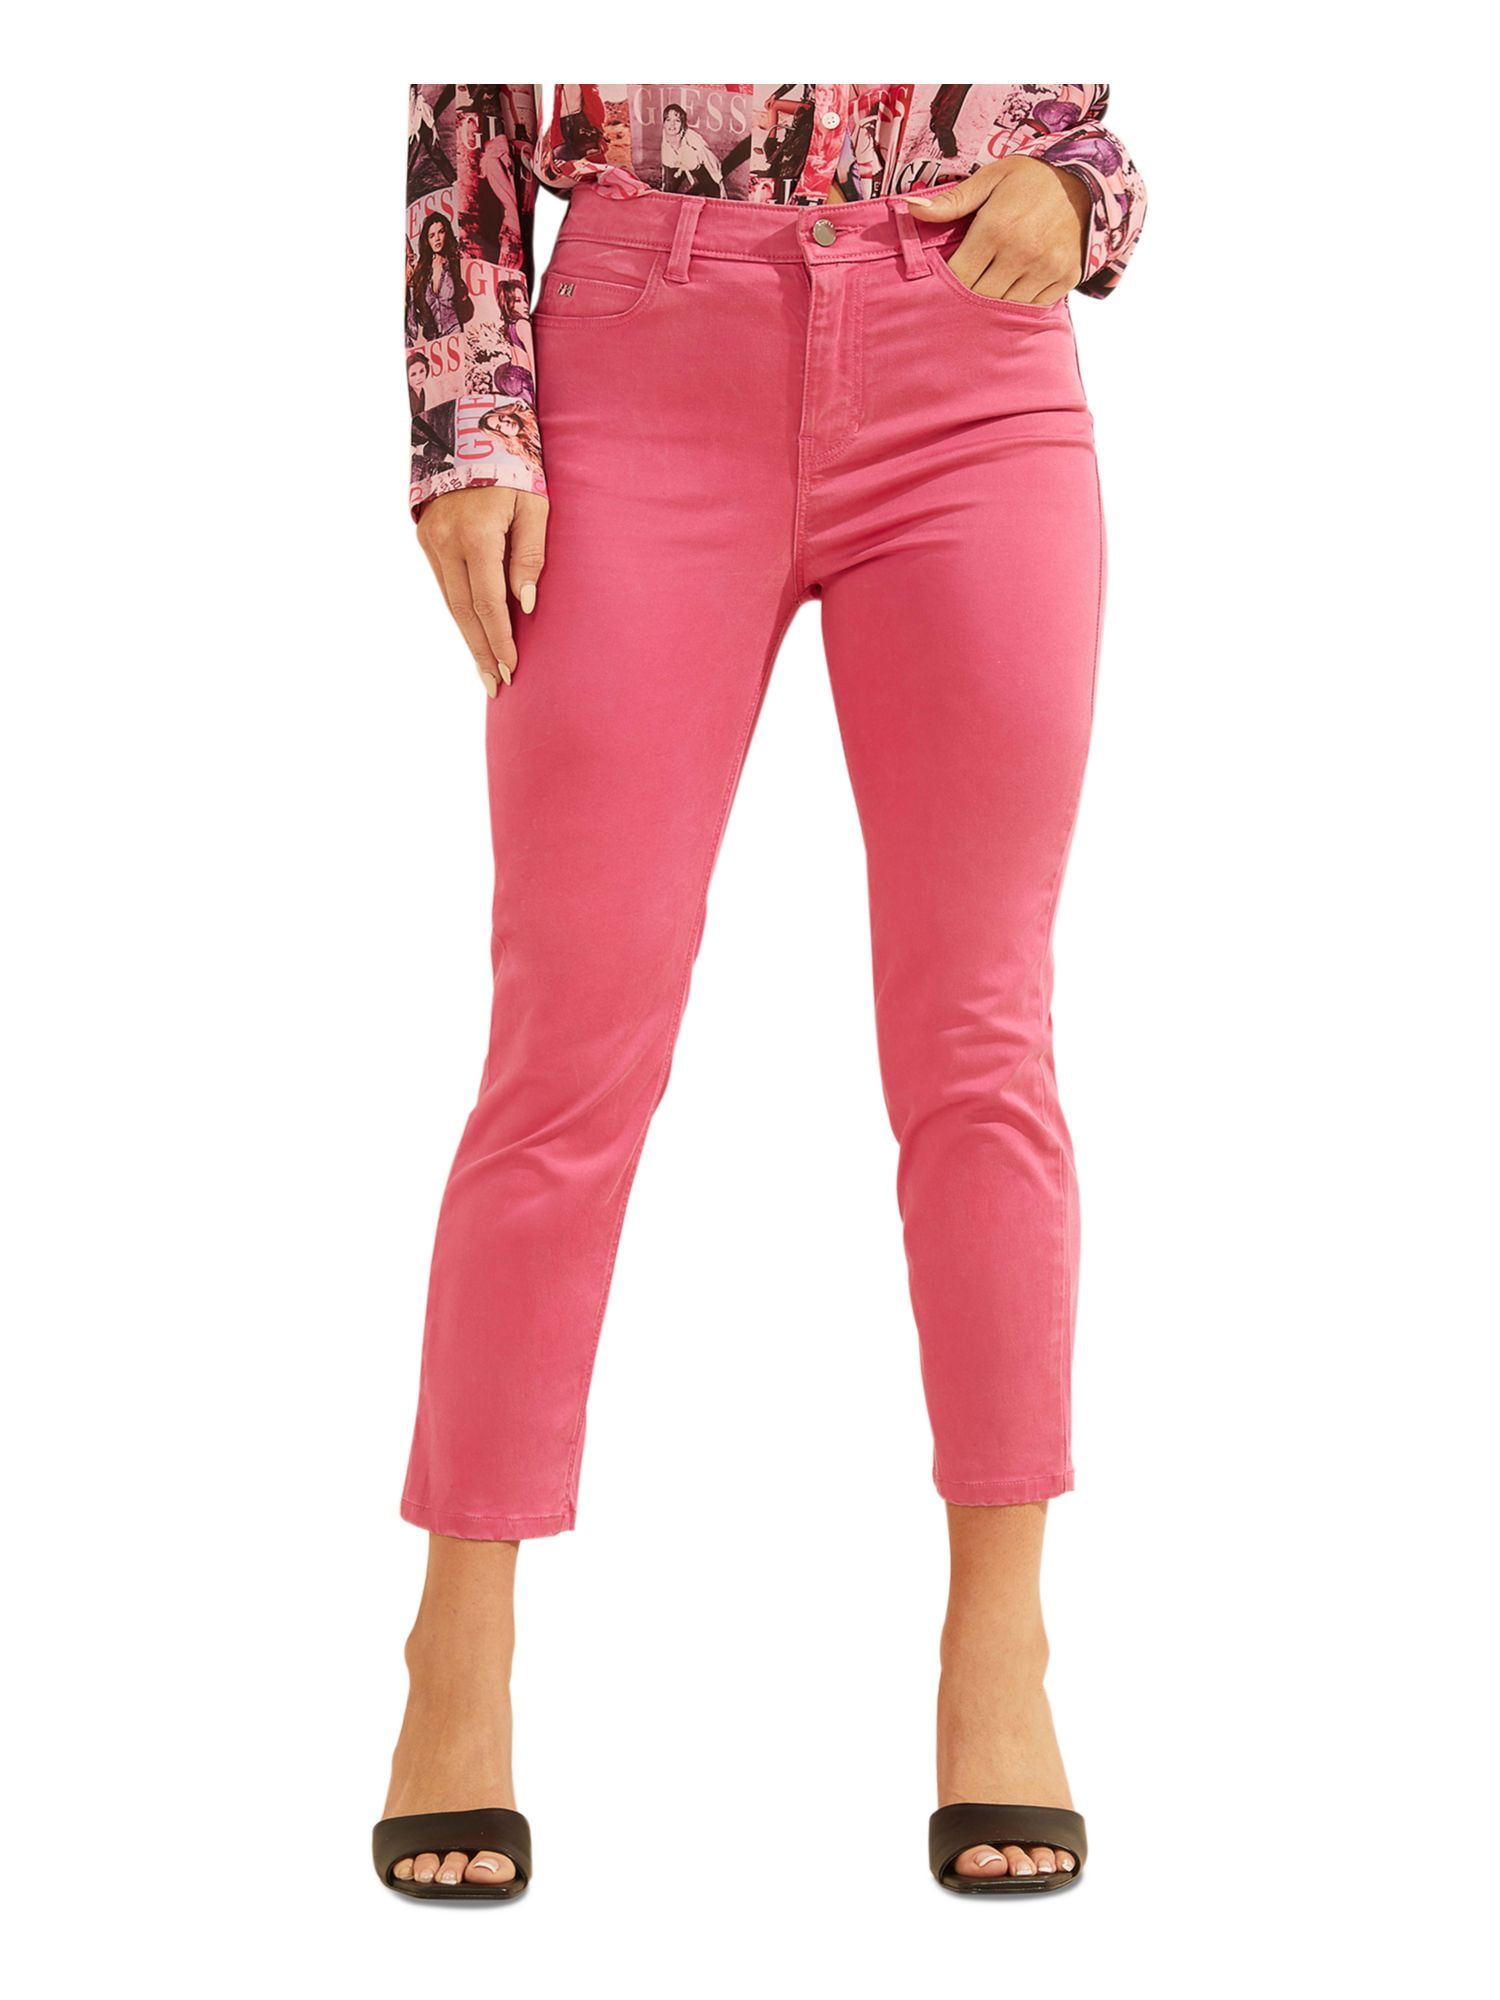 GUESS Womens Pink Stretch Pocketed Zippered High-rise Capri Skinny